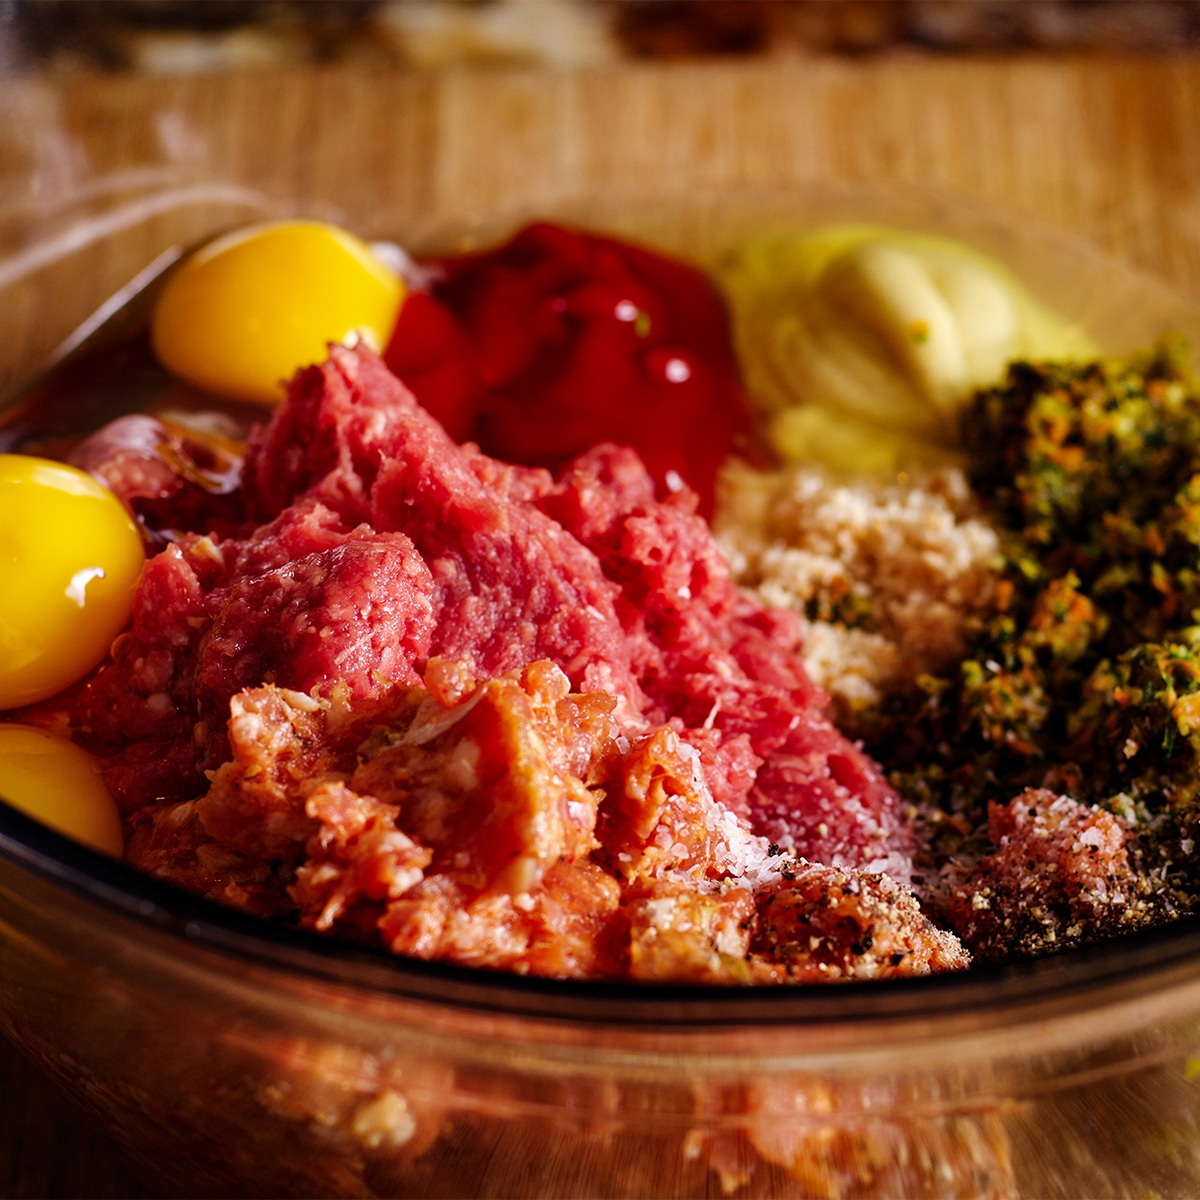 All the ingredients you need to make classic meatloaf with Italian sausage.